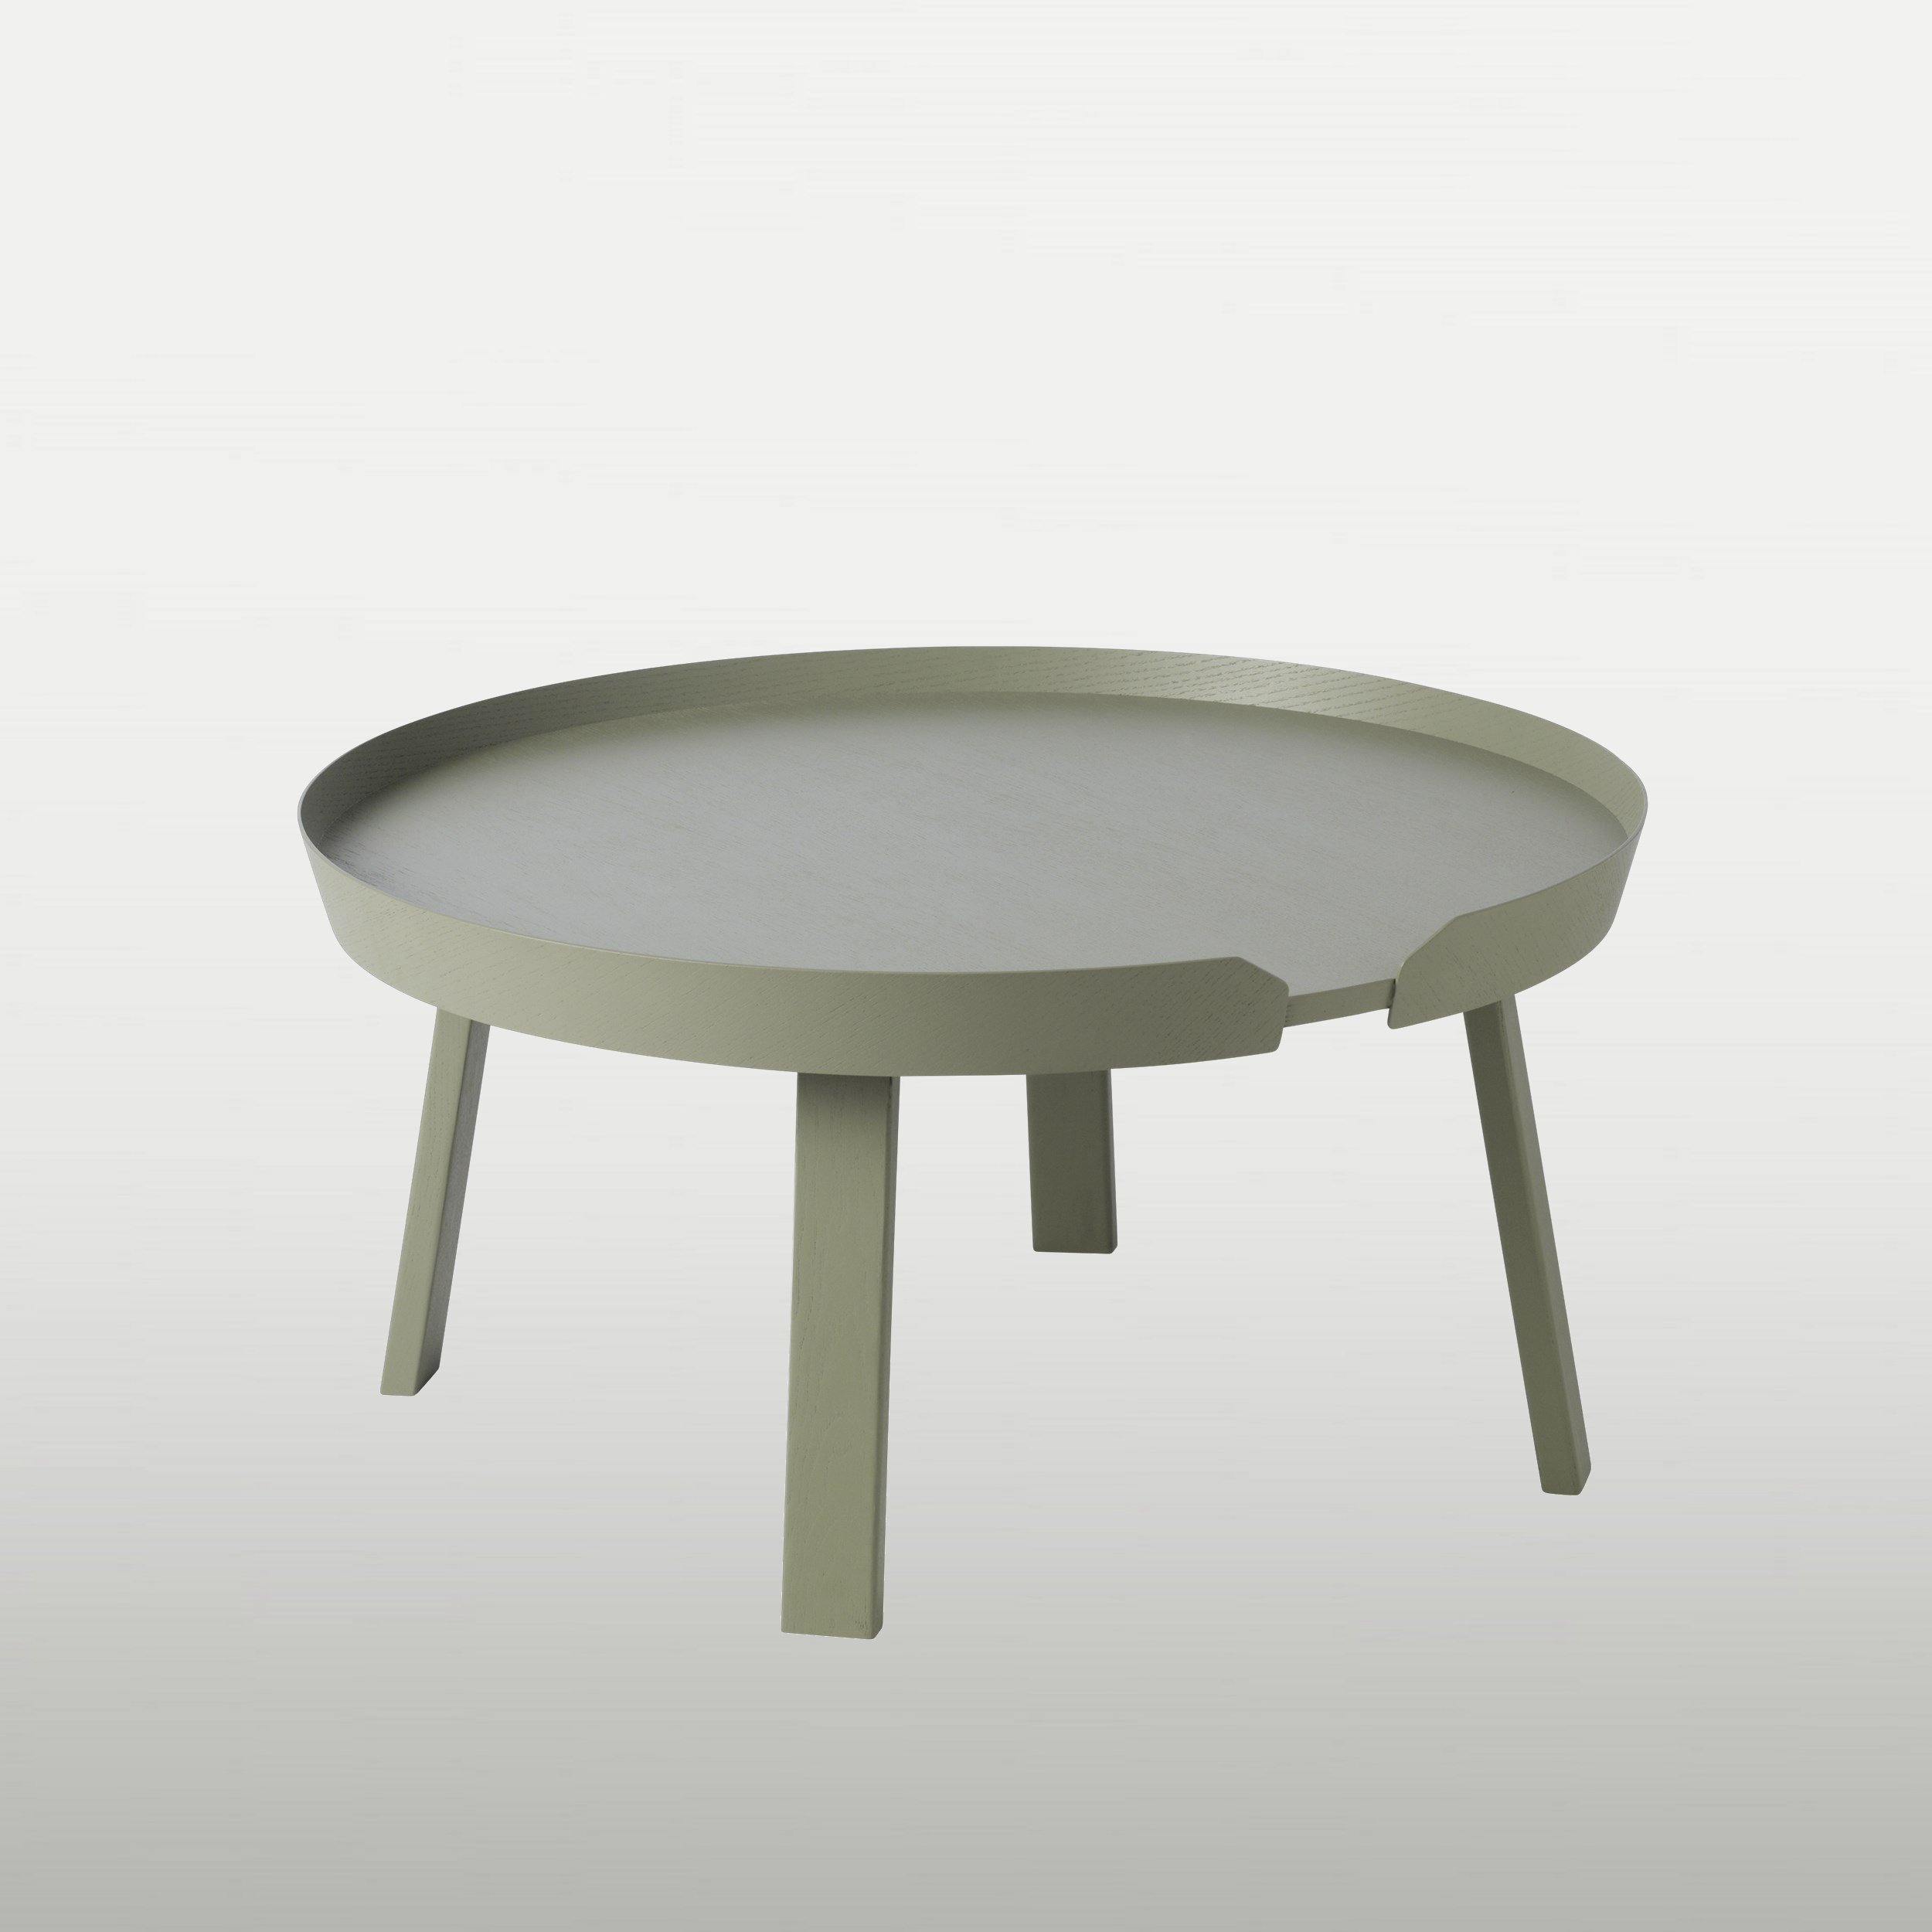 Lounge table Around L, D72 H36, gray/green